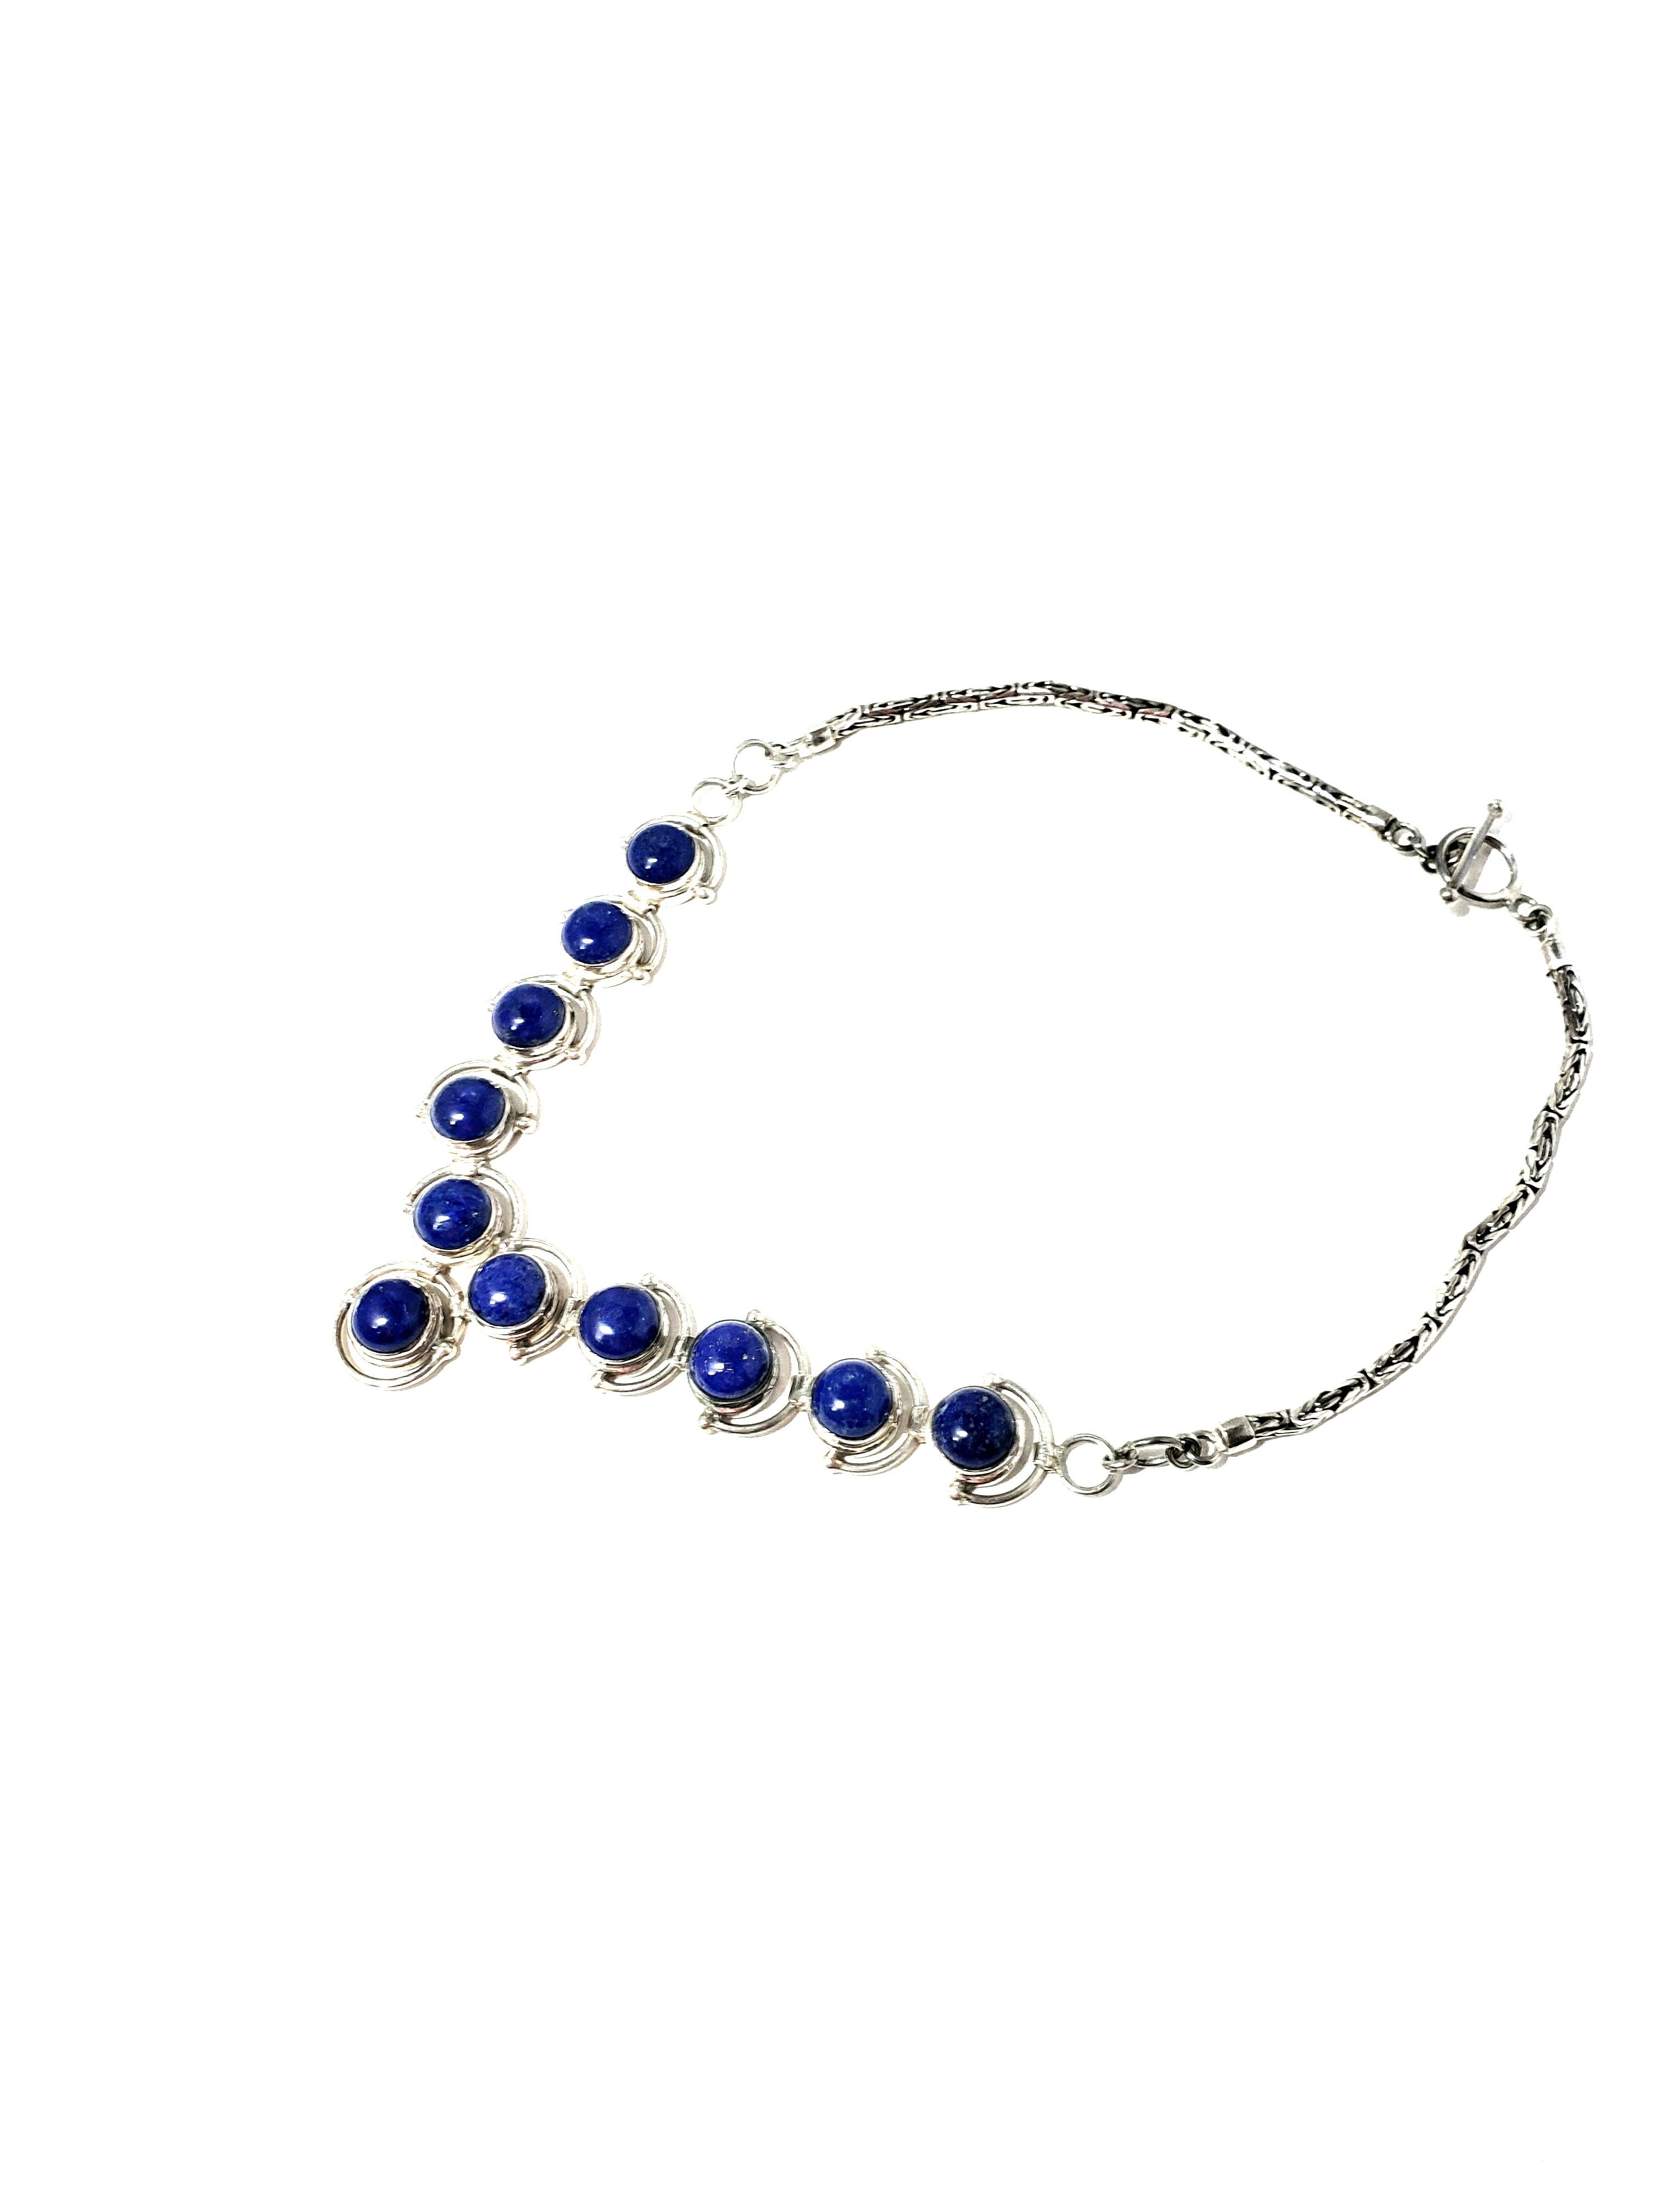 Sterling Silver Cabochon Lapis Lazuli Link Necklace For Sale 2